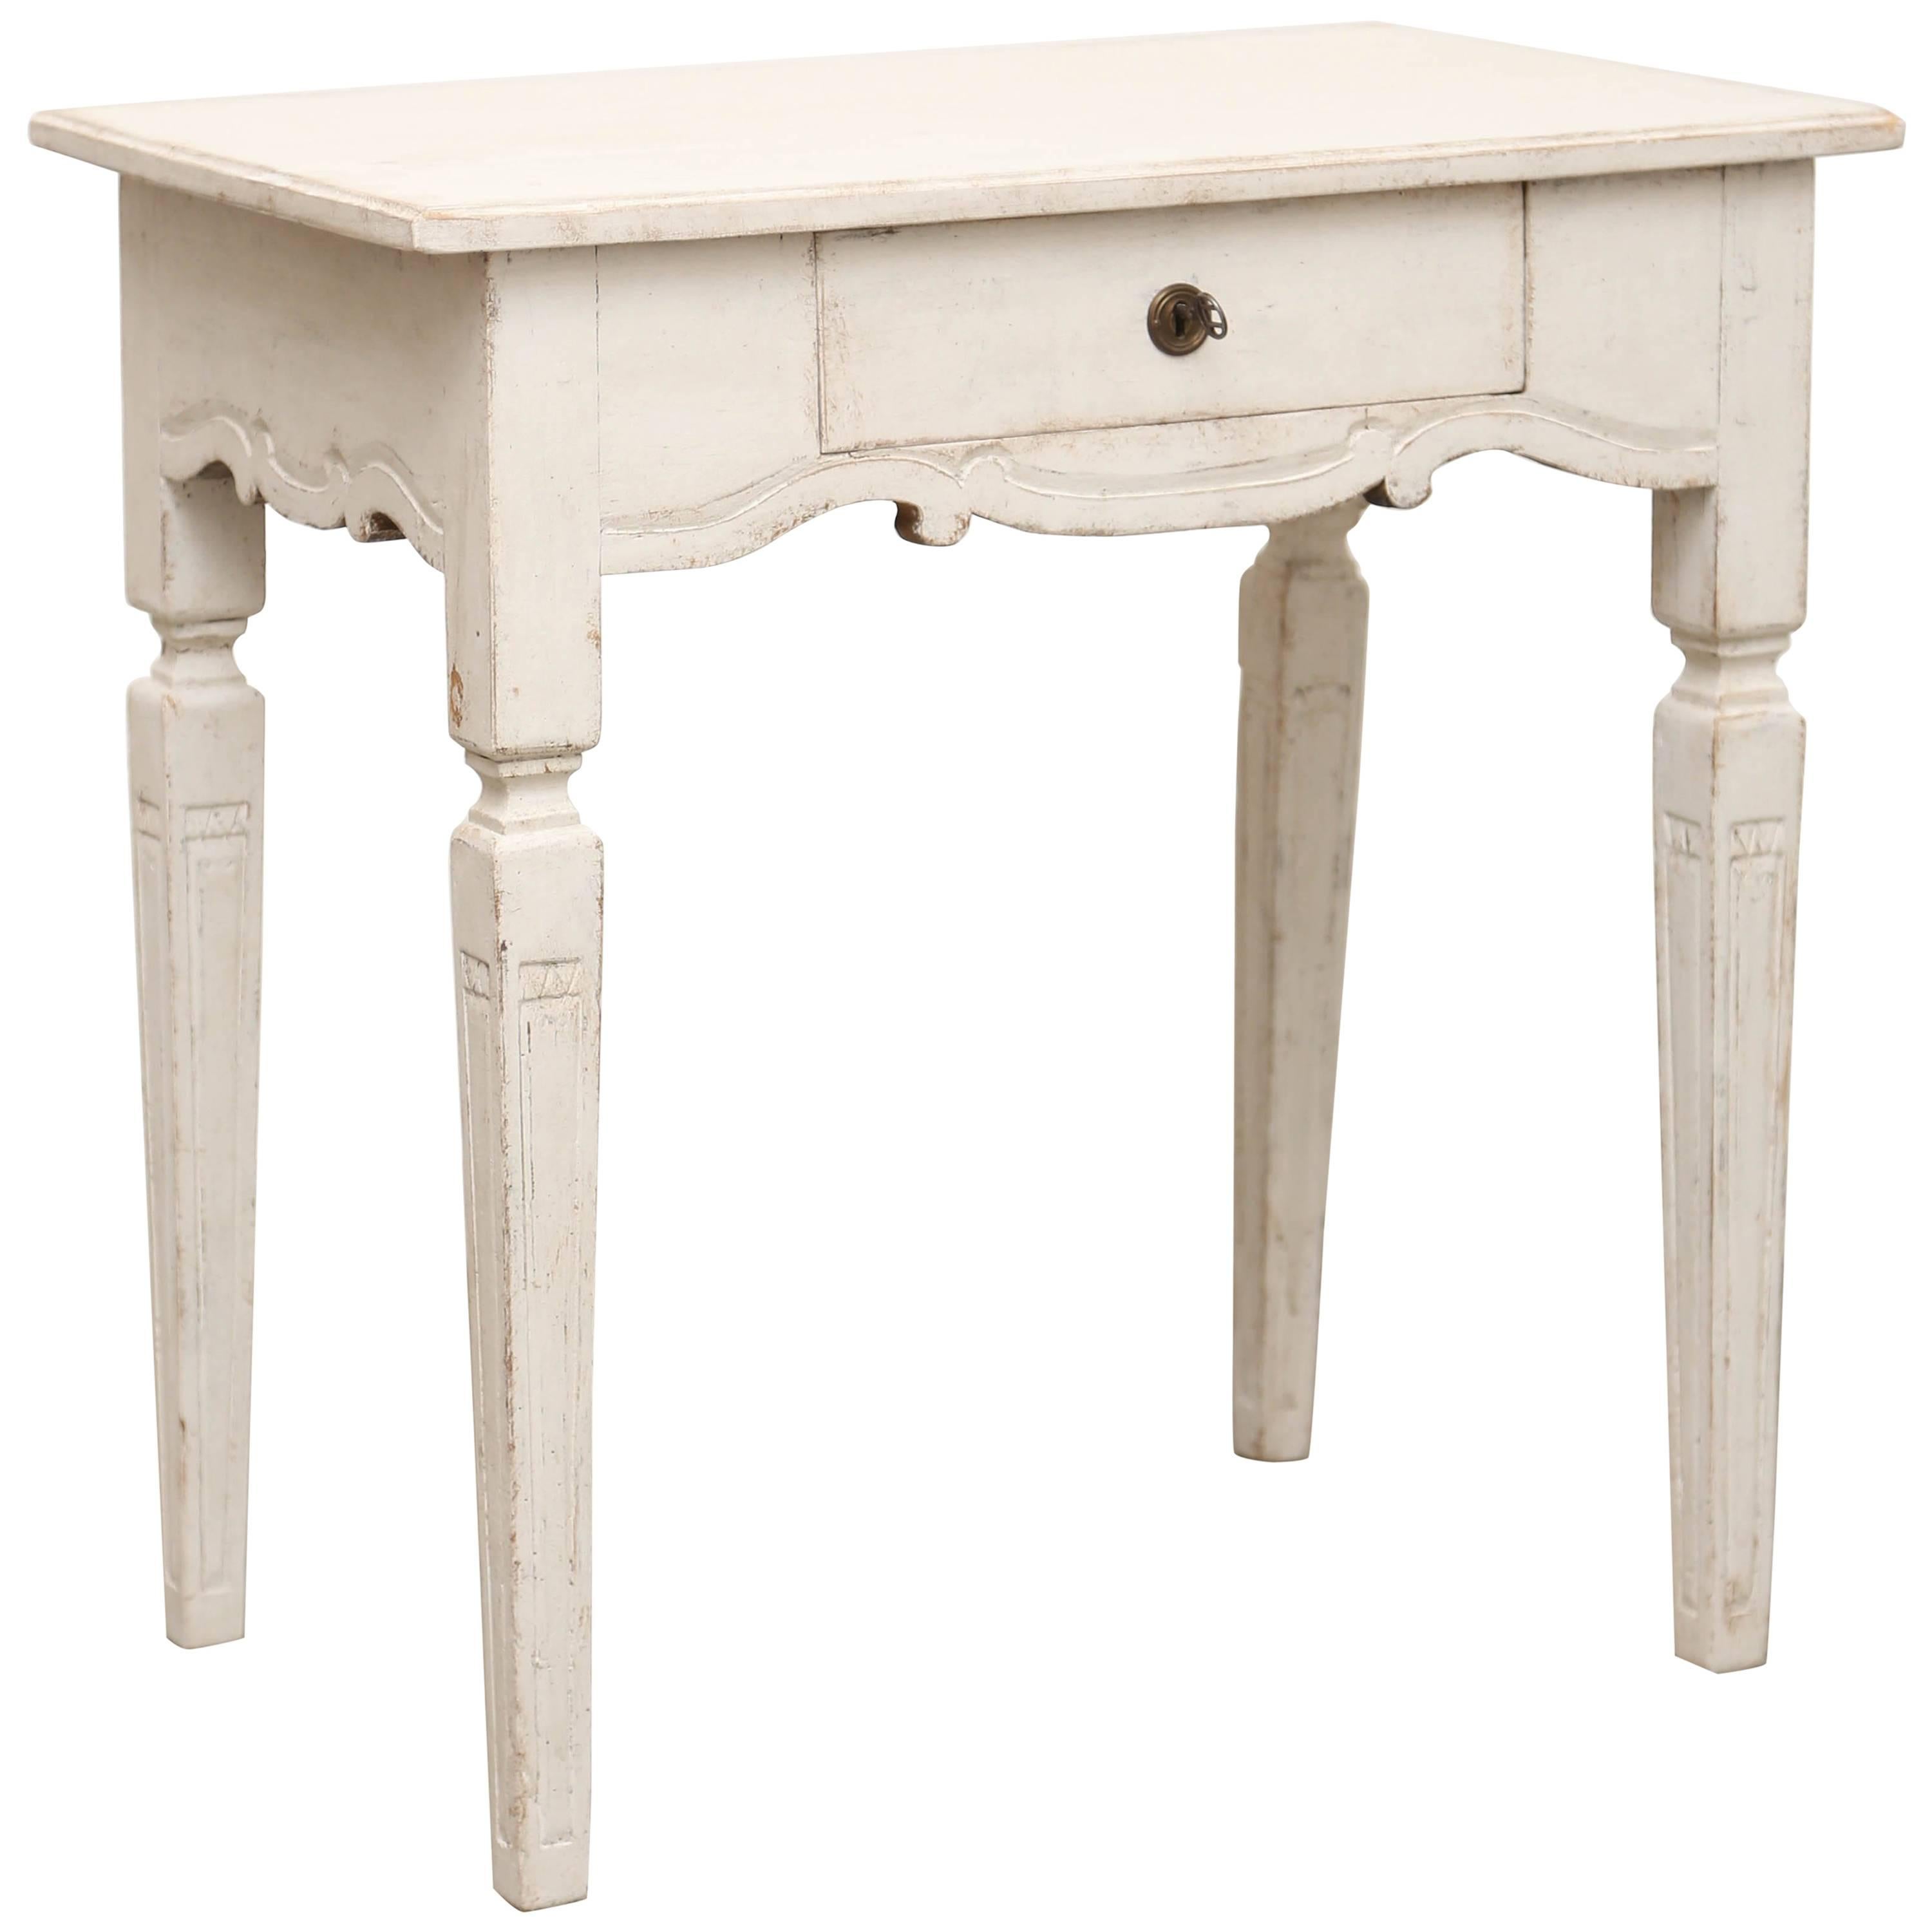 Antique Gustavian Style Painted Side Table with Single Drawer, 19th Century For Sale